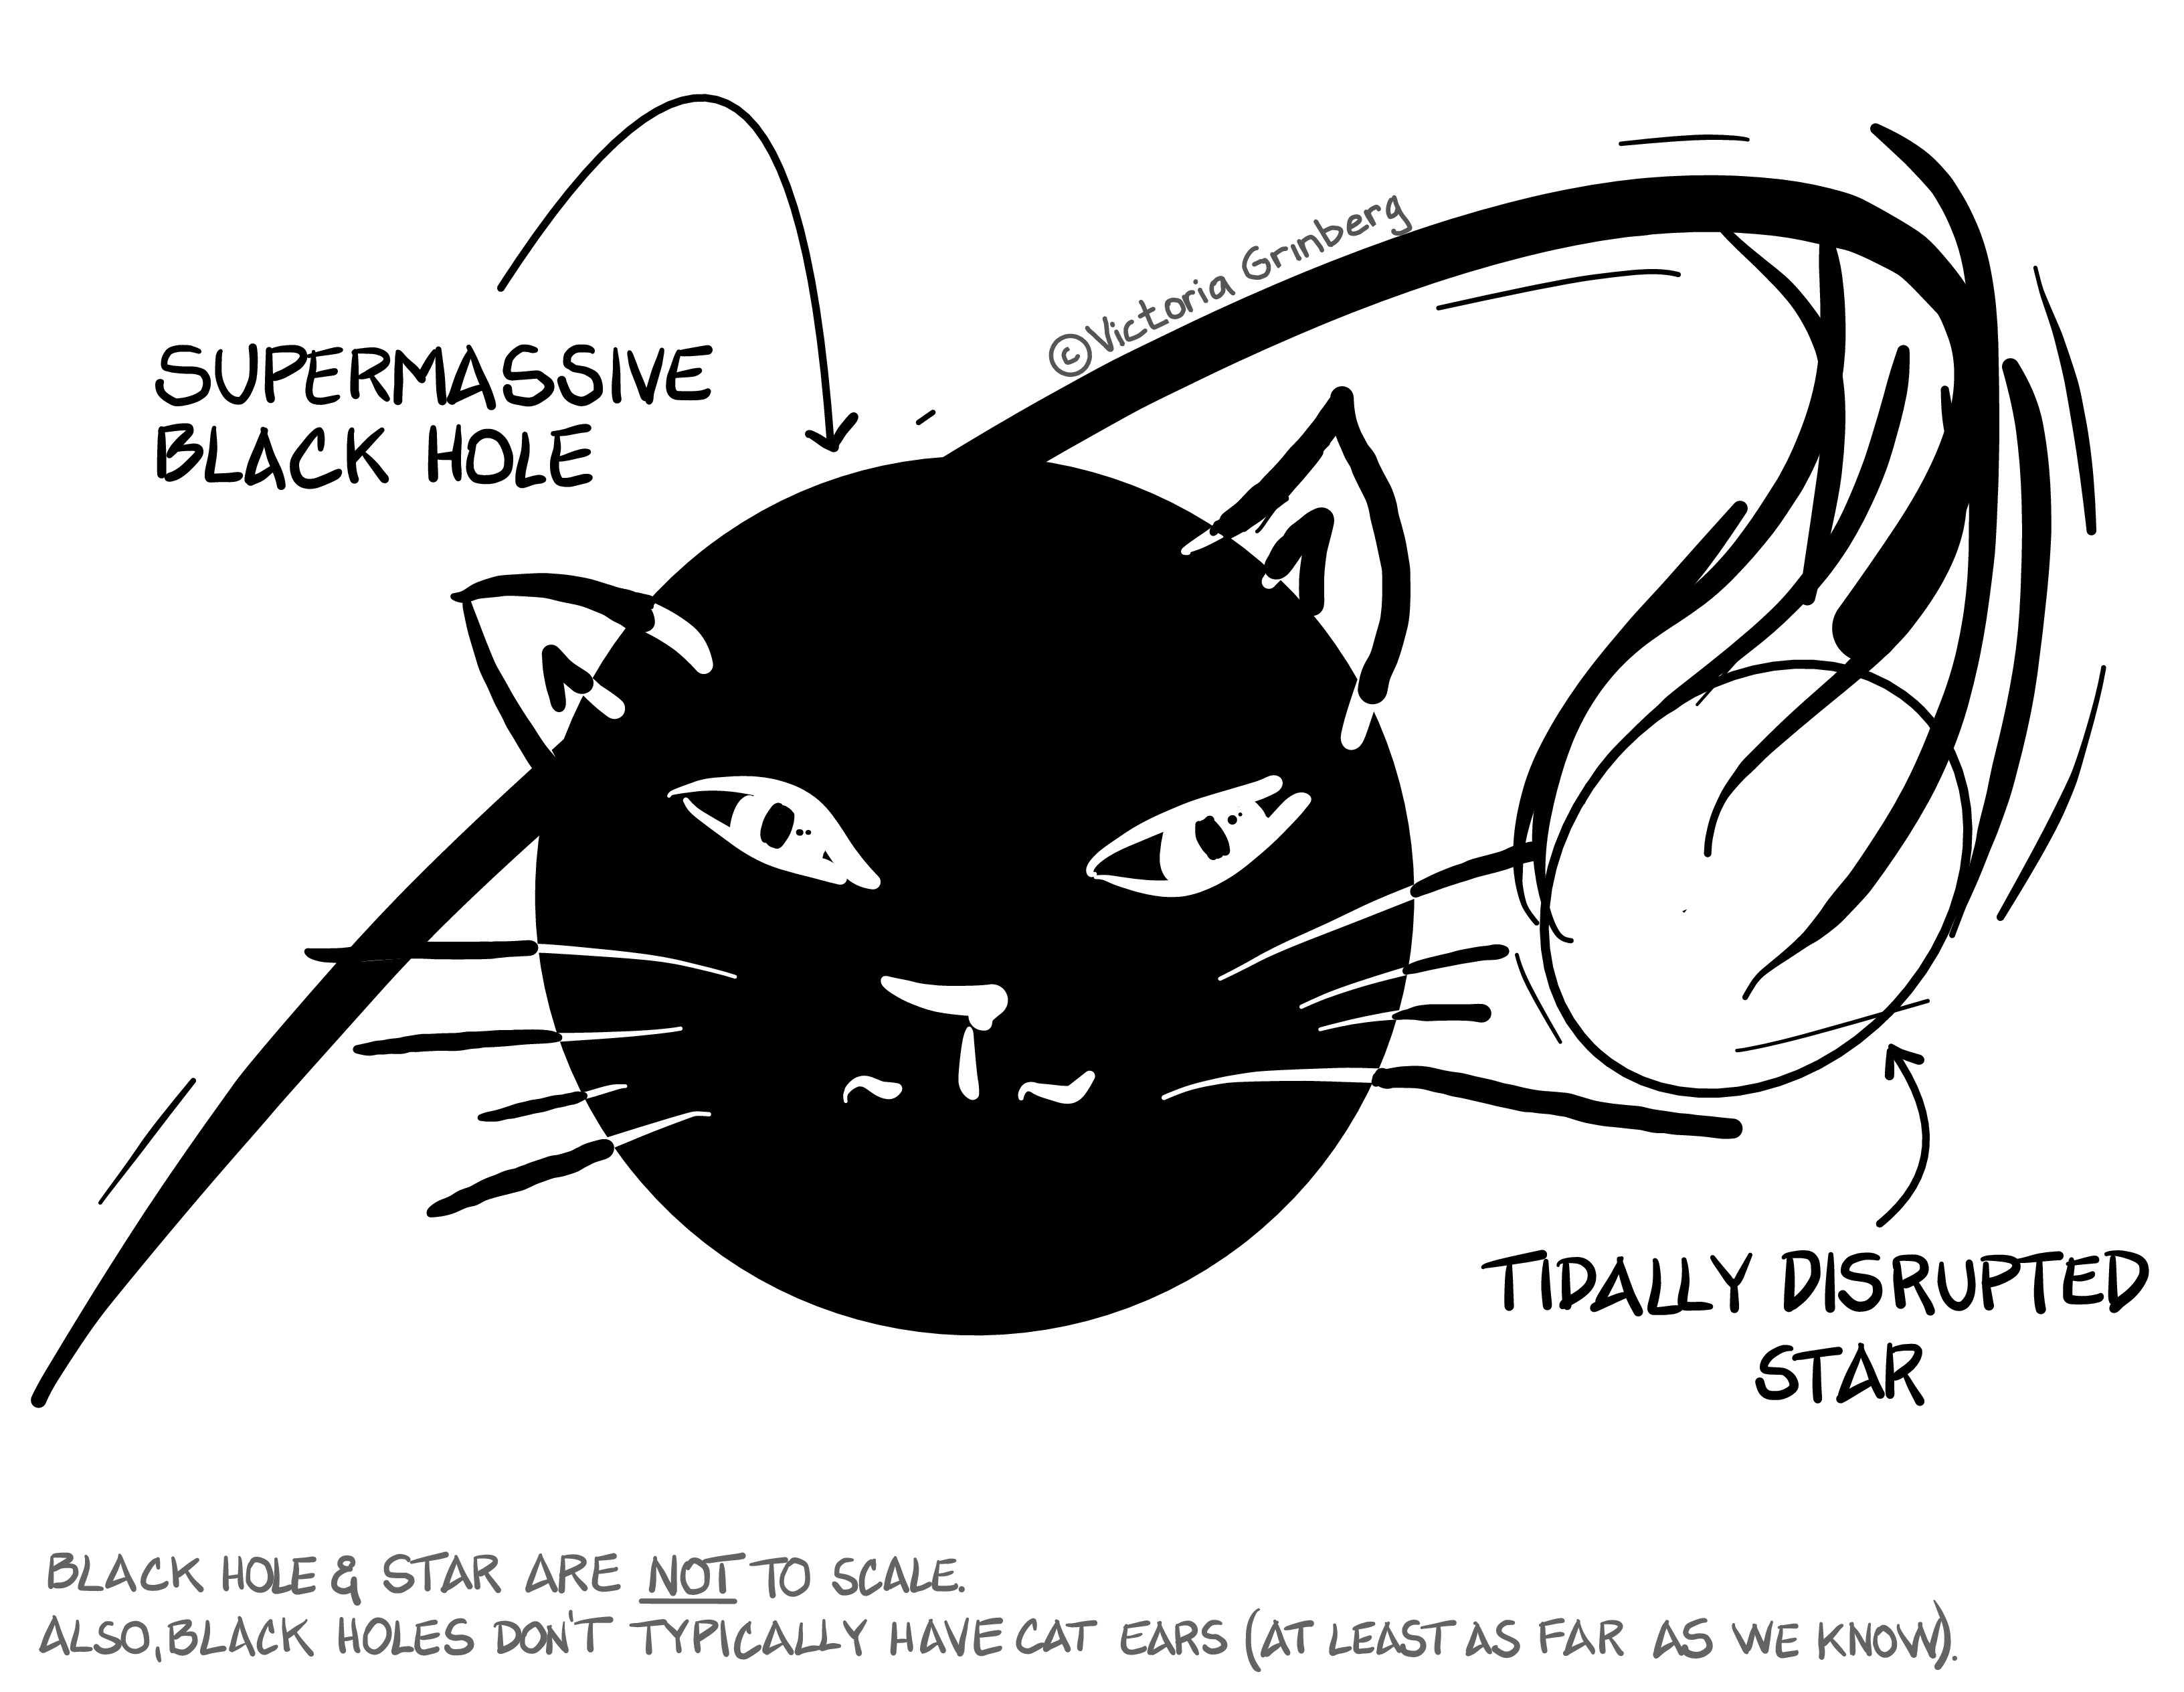 Black and white digital drawing. A big black hole, with cat ears and face, labelled 'supermassive black hole' and orbiting it a distorted object, labelled 'tidally distrupted star'. The black hole is looking at the star, smirking. Below the is written 'Black hole & star are not to scale. Also, black holes don't usually have ears (at least as far as we know).